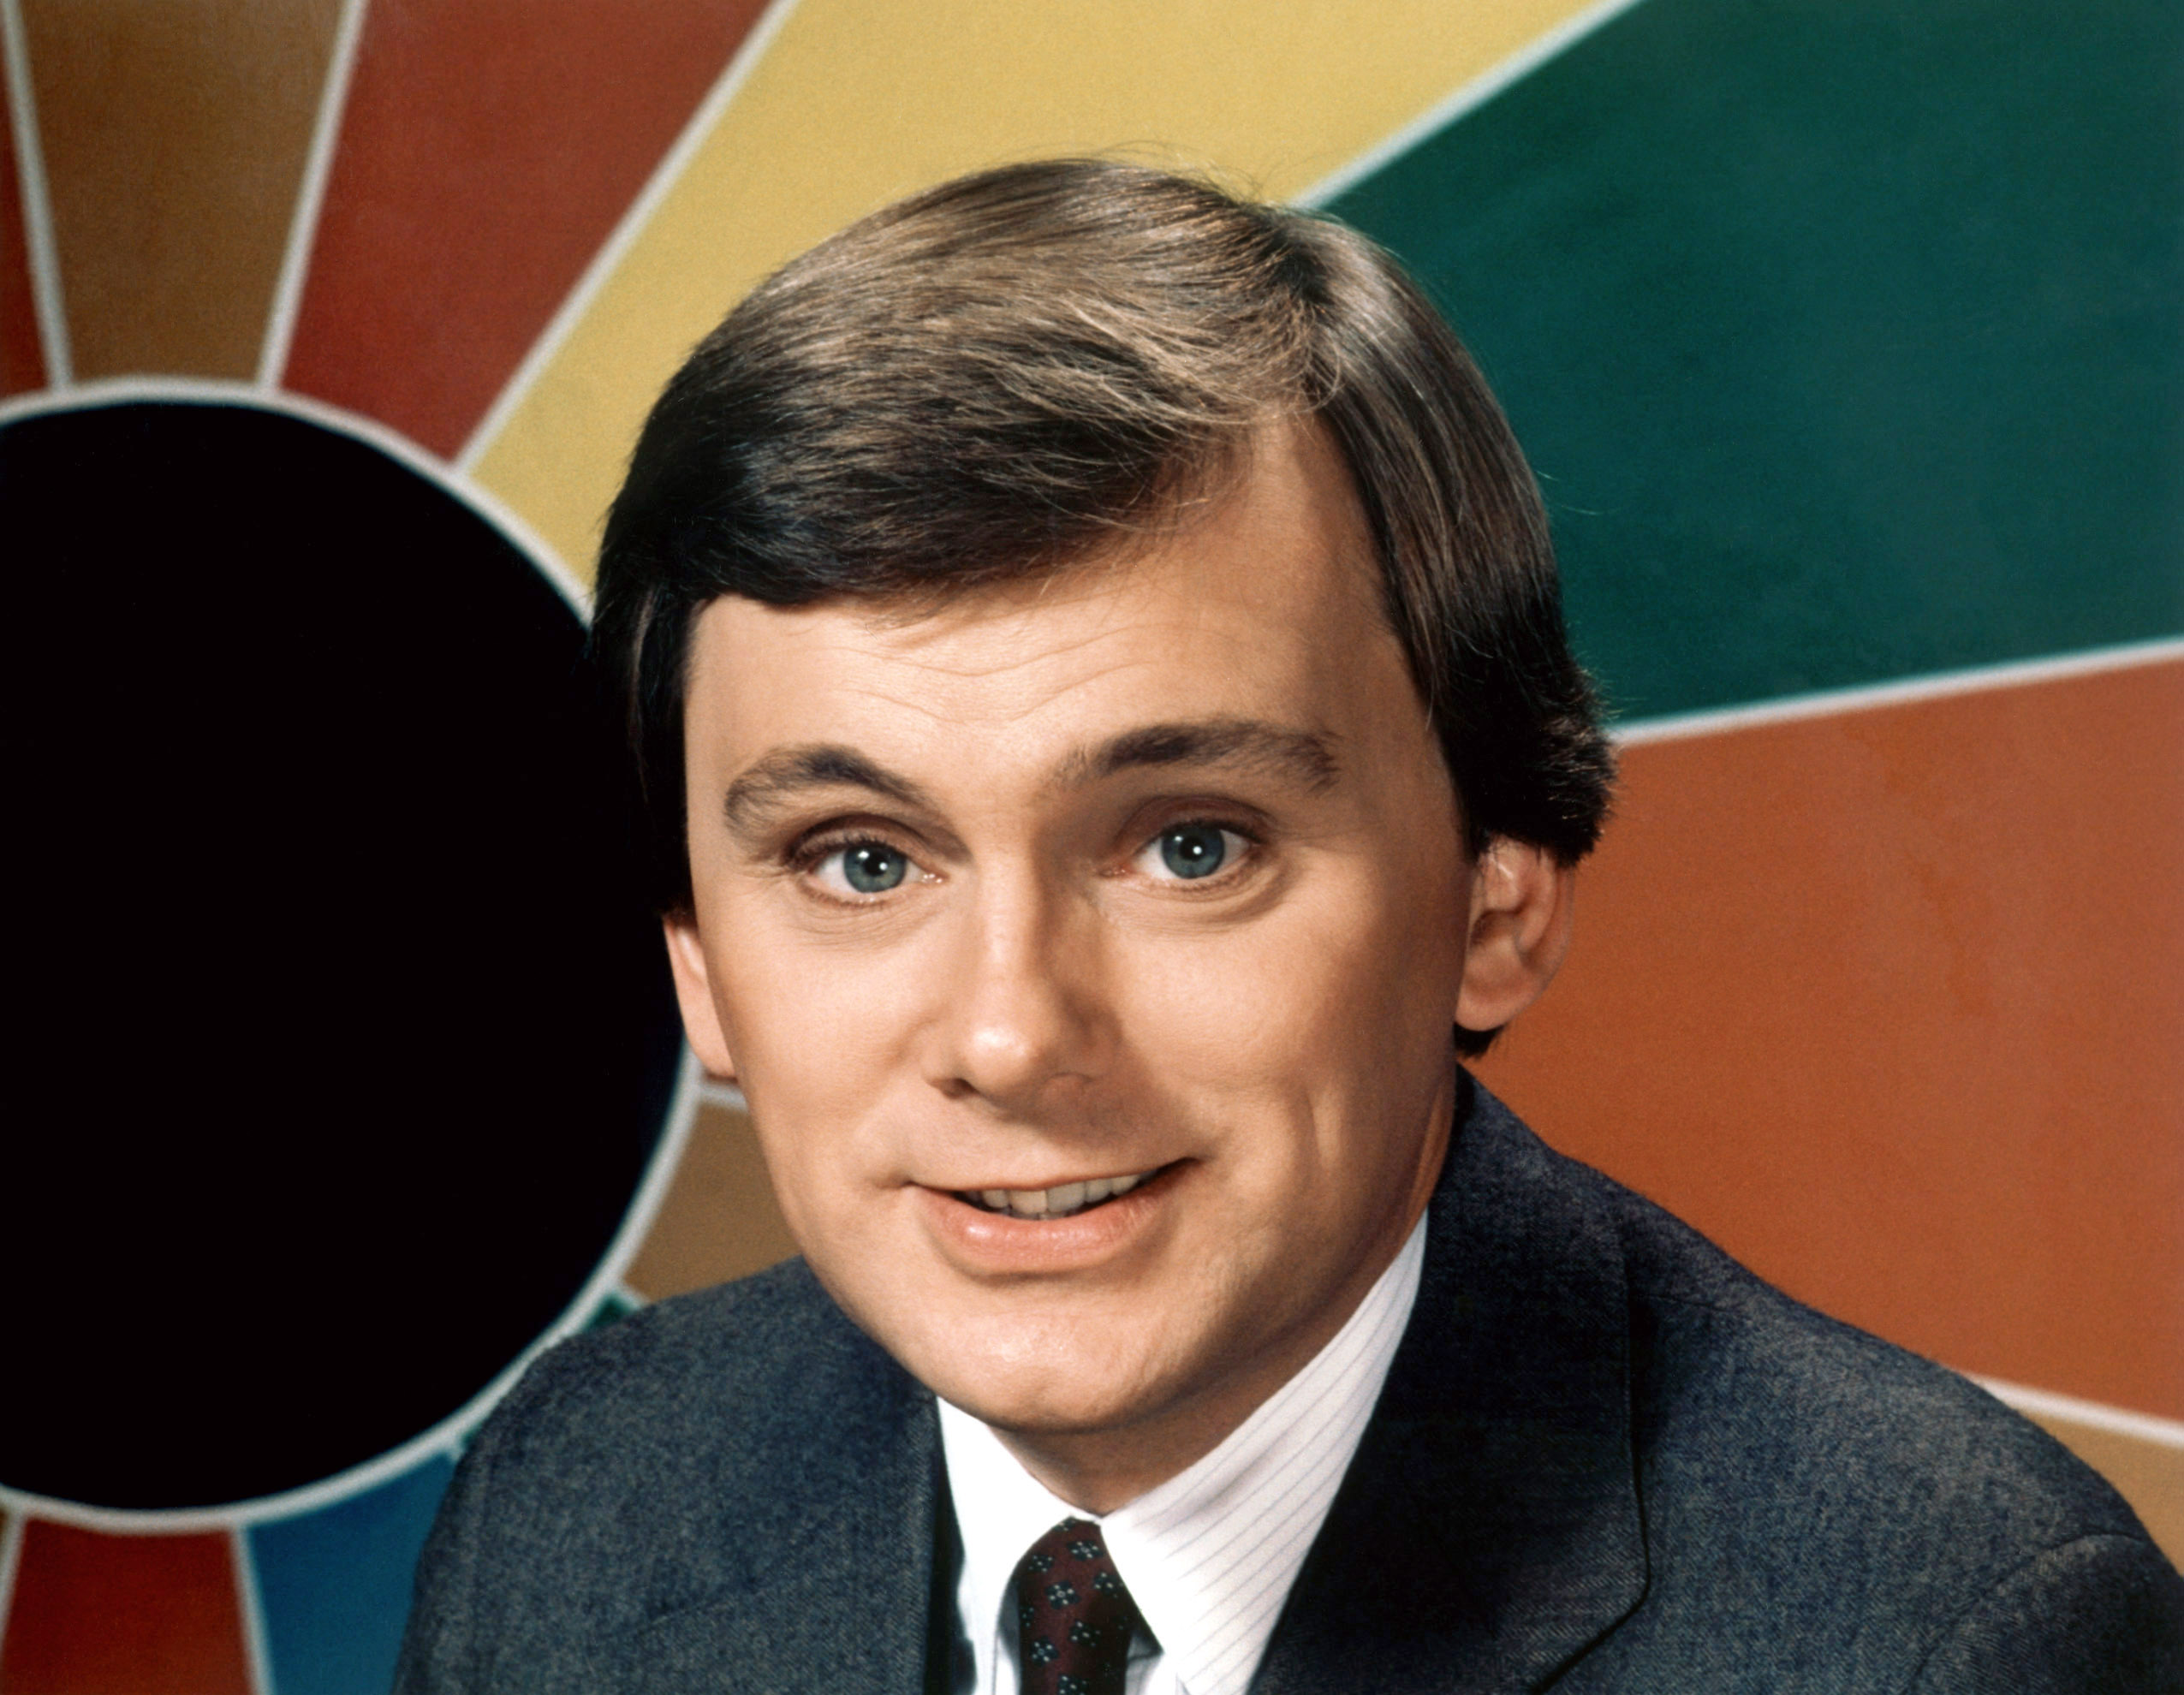 Pat Sajak retiring from 'Wheel of Fortune' after more than four decades